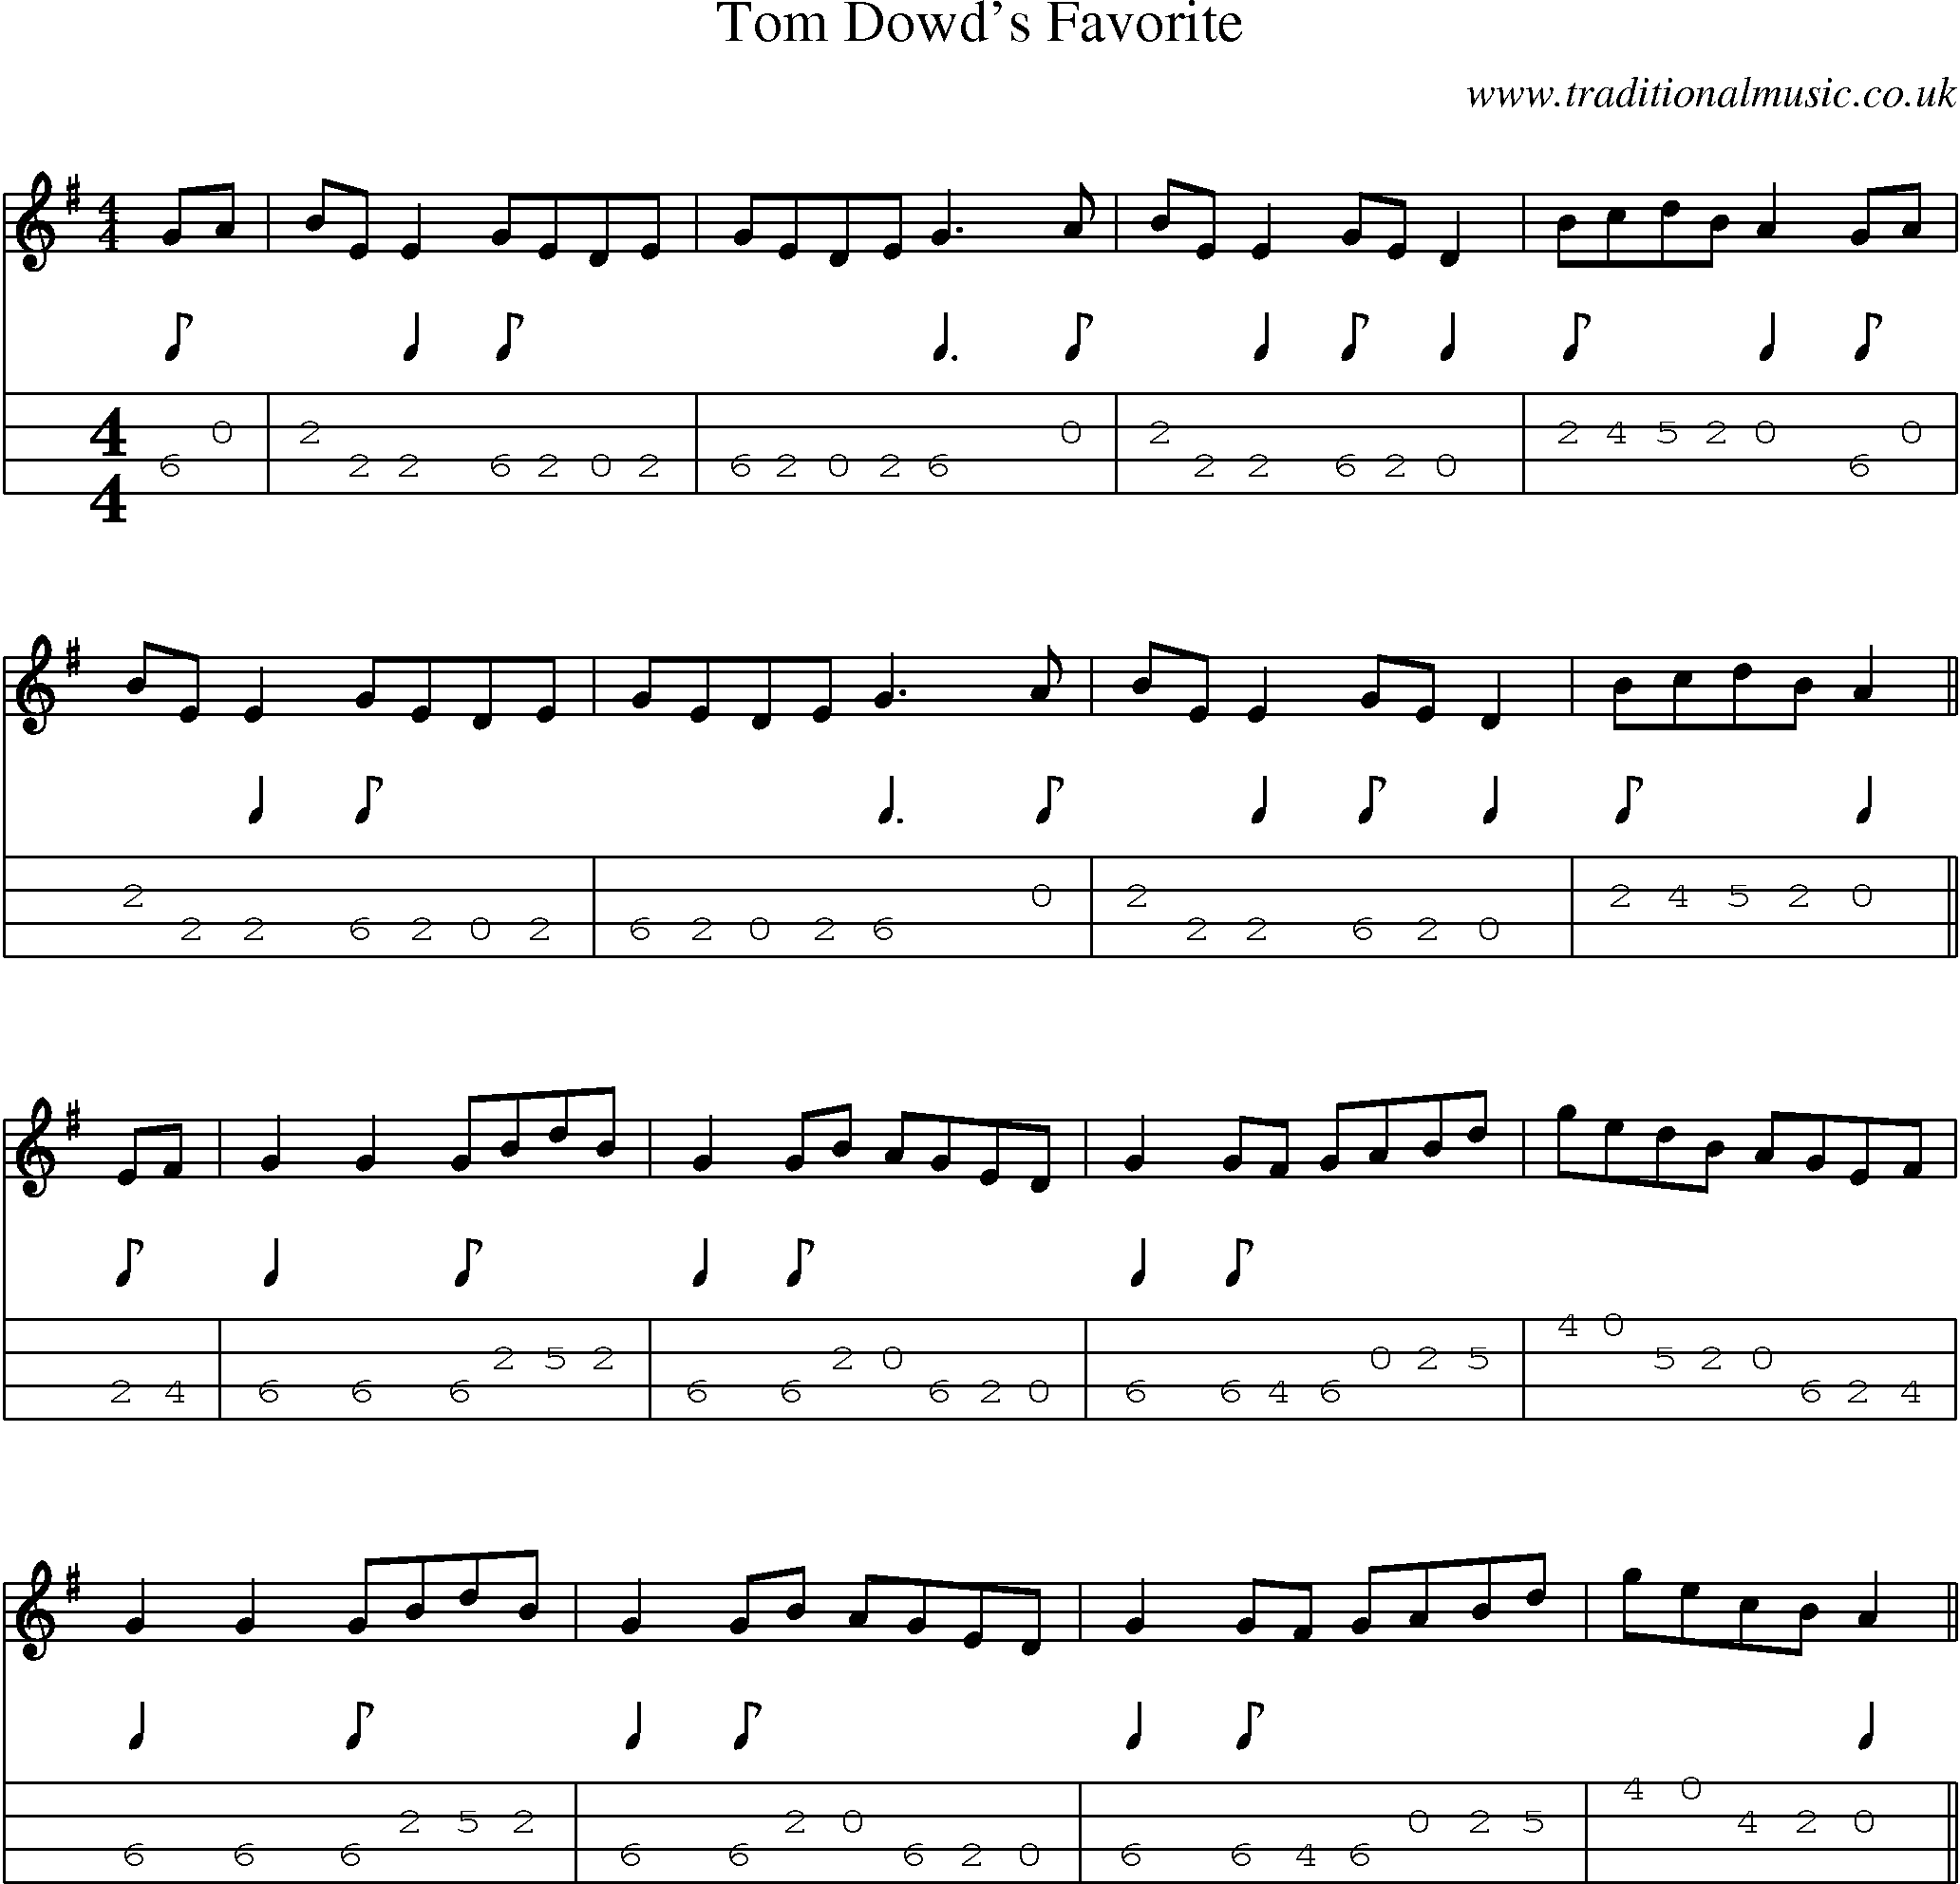 Music Score and Mandolin Tabs for Tom Dowds Favorite